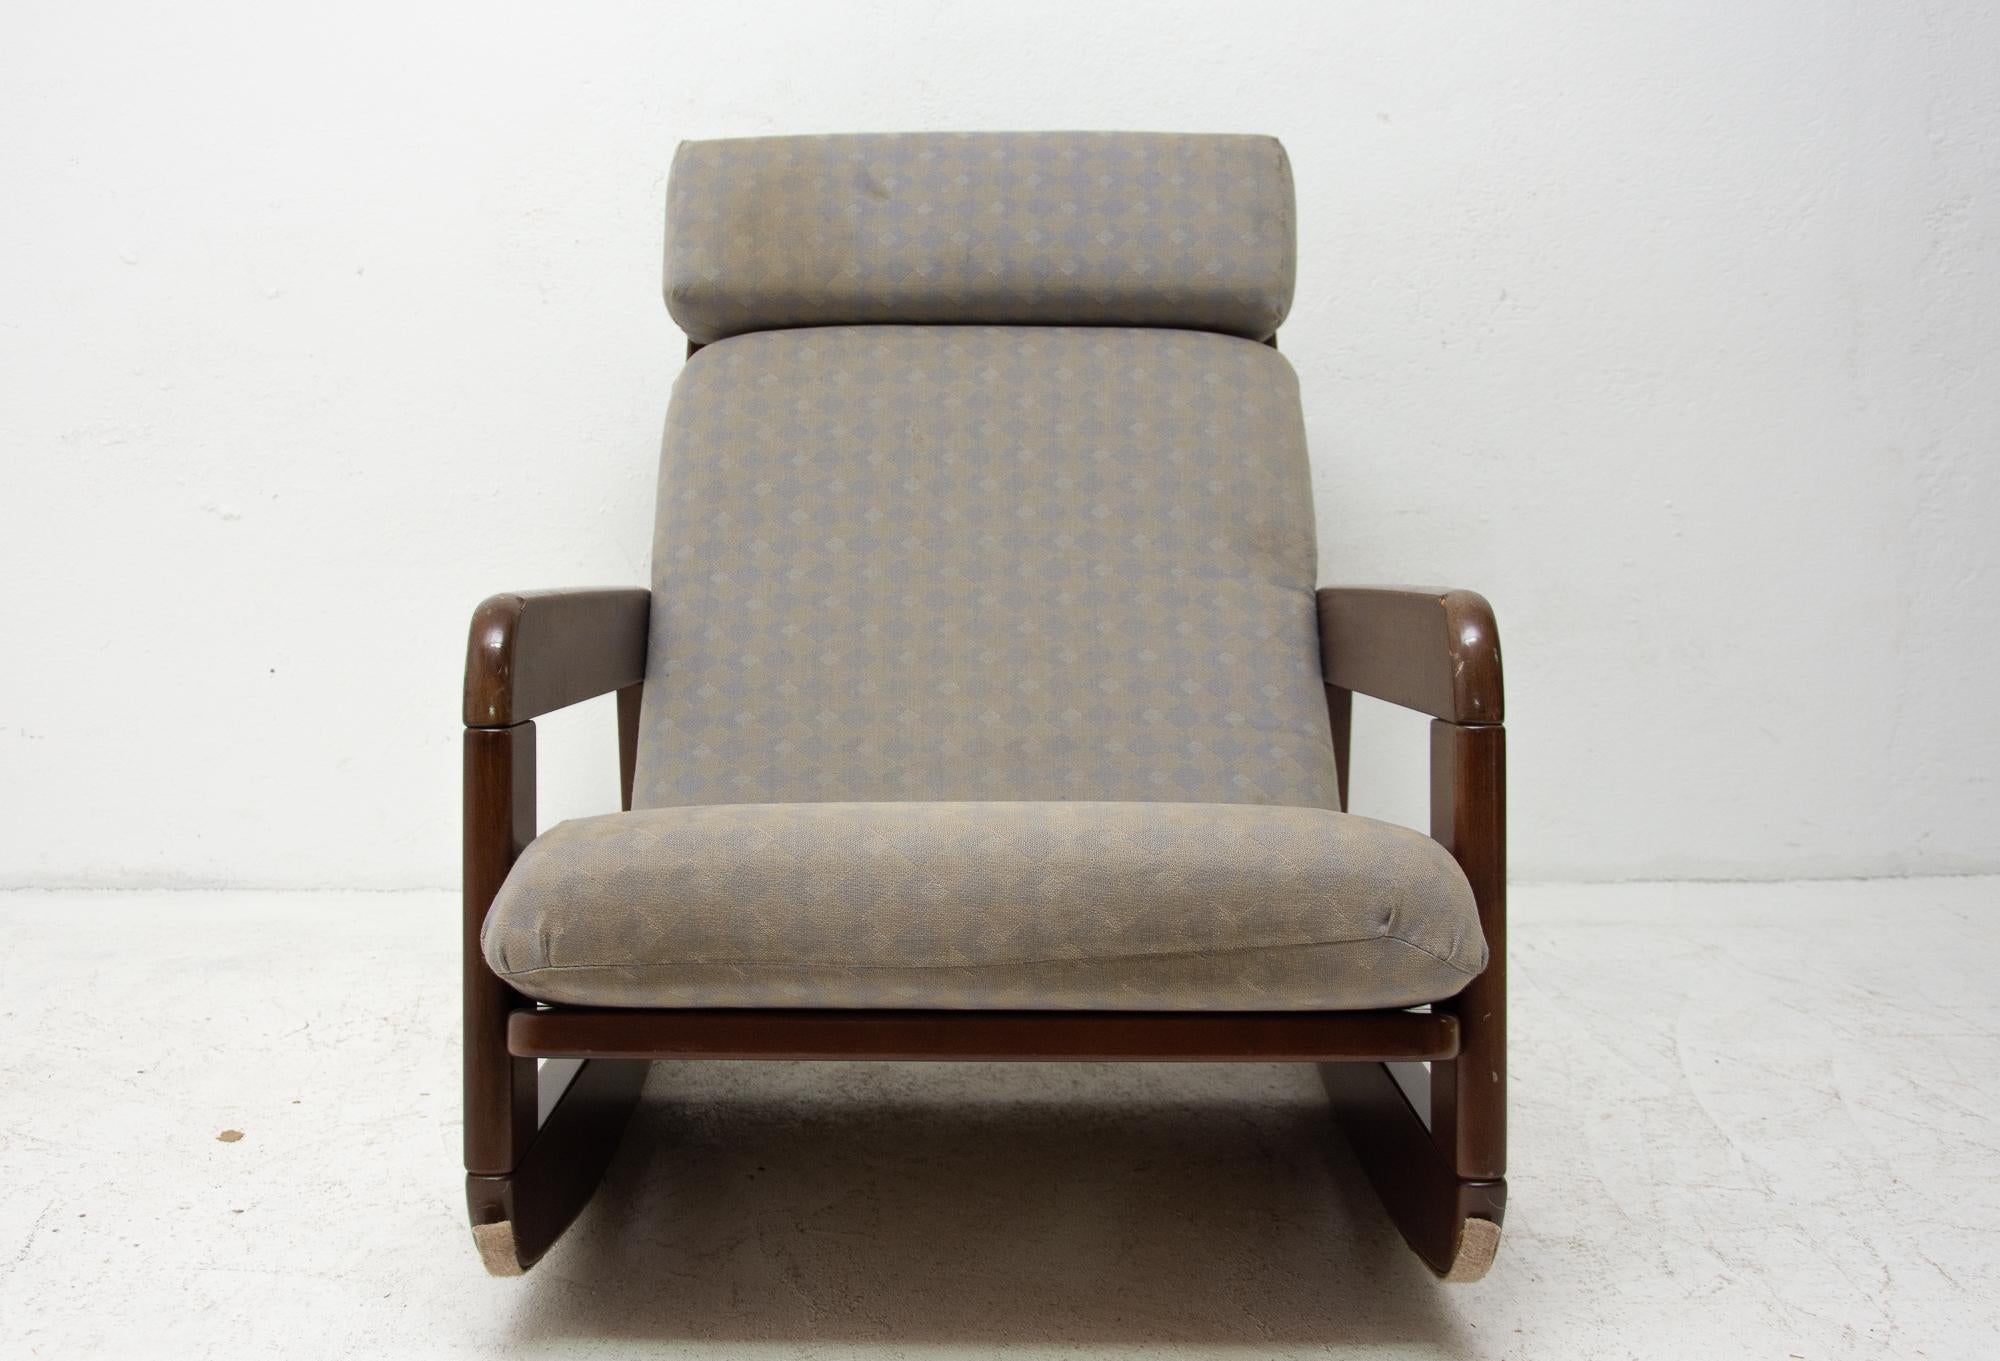 This upholstered bentwood rocking chair was made in Czechoslovakia in the former Czechoslovakia in the 1960s. The frame is probably made of stained beech wood and bears slight signs of use.
The upholstery is original, worn on the seat, needs to be